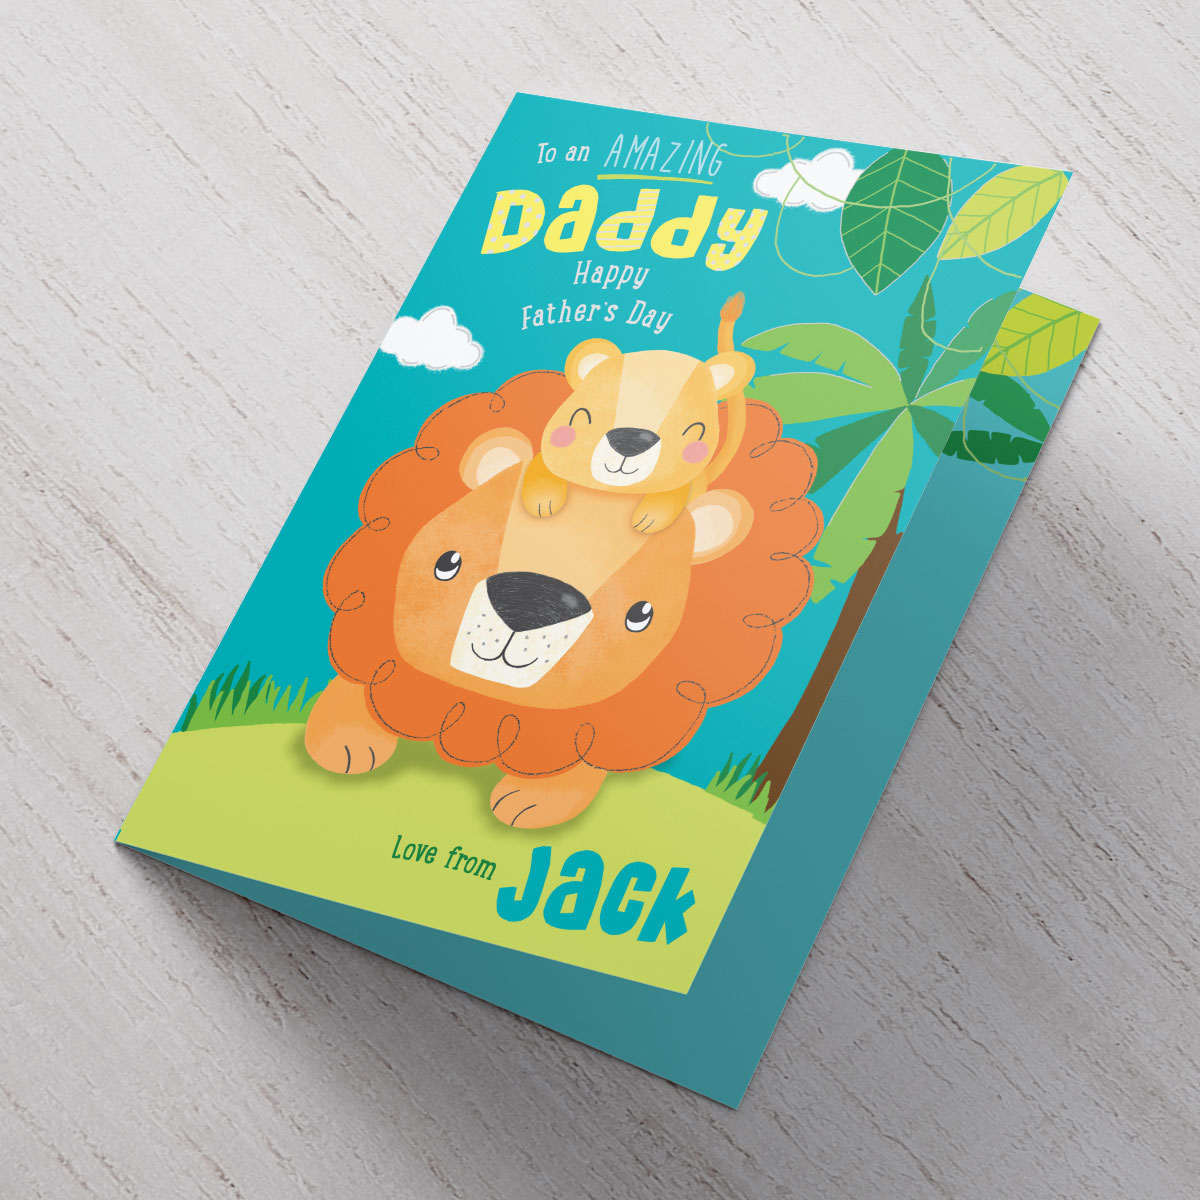 Personalised Father's Day Card - Amazing Daddy Lion